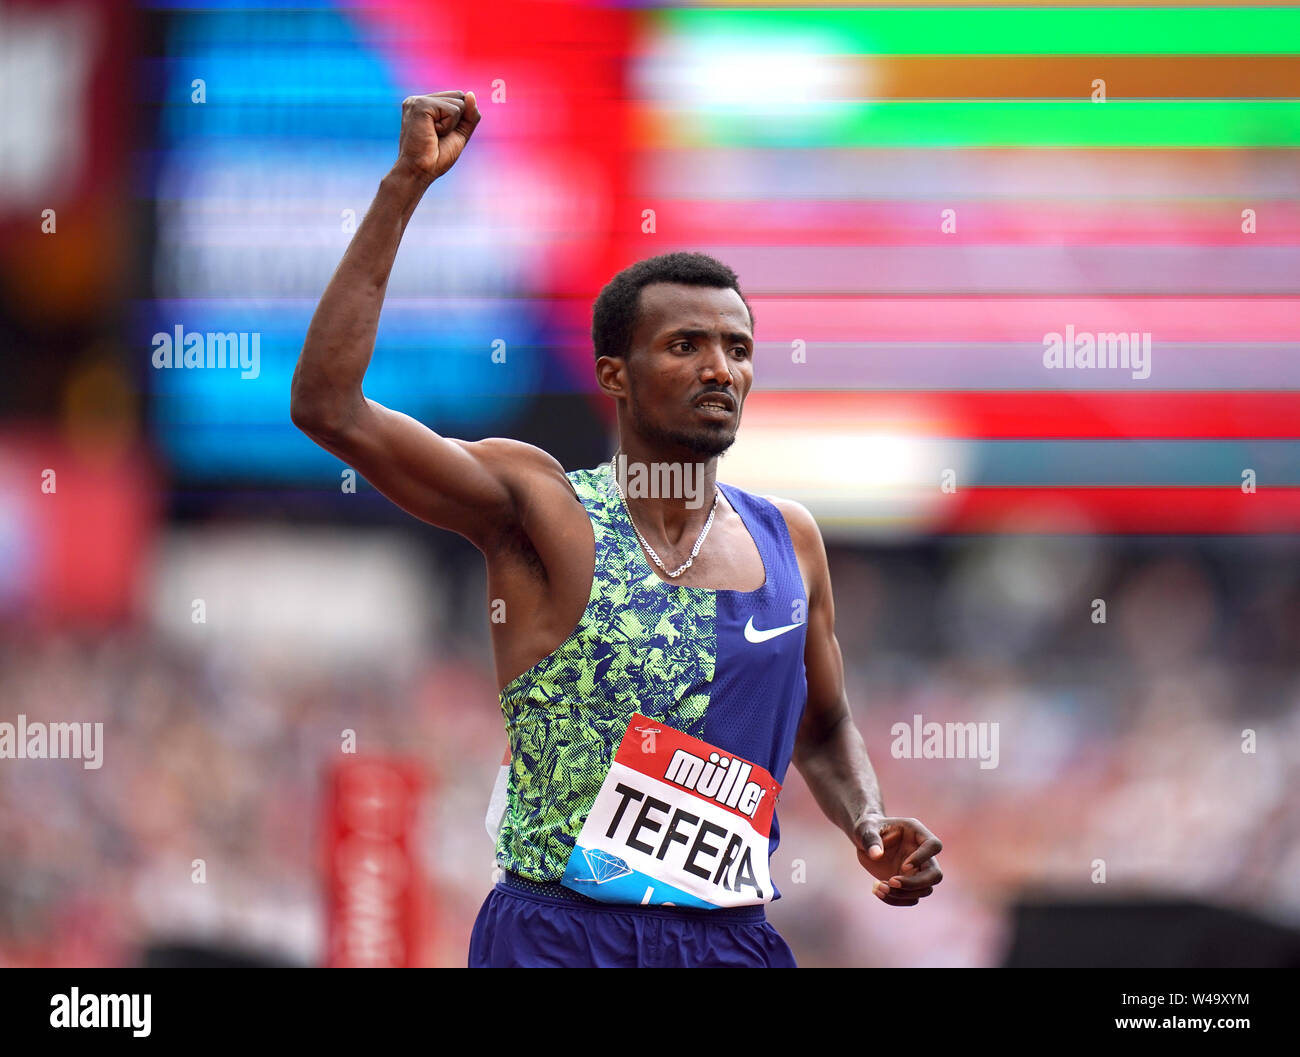 Ethiopia's Samuel Tefera wins the Men's 1 Mile during day two of the IAAF London Diamond League meet at the London Stadium. Stock Photo